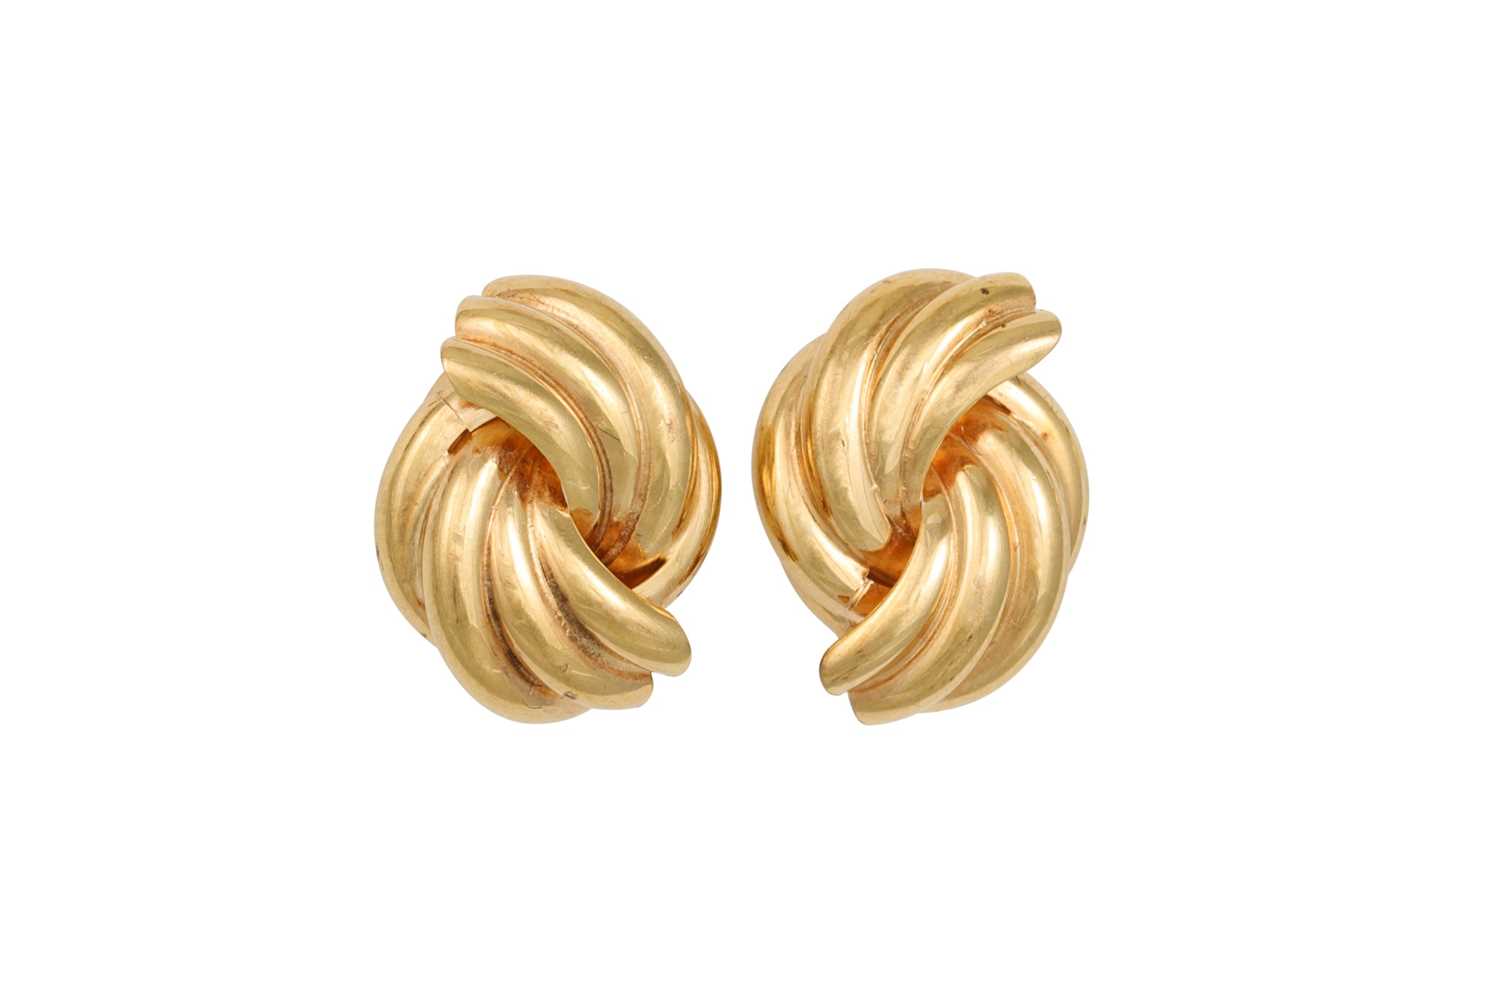 Lot 41 - A PAIR OF KNOT EARRINGS, in 9ct yellow gold